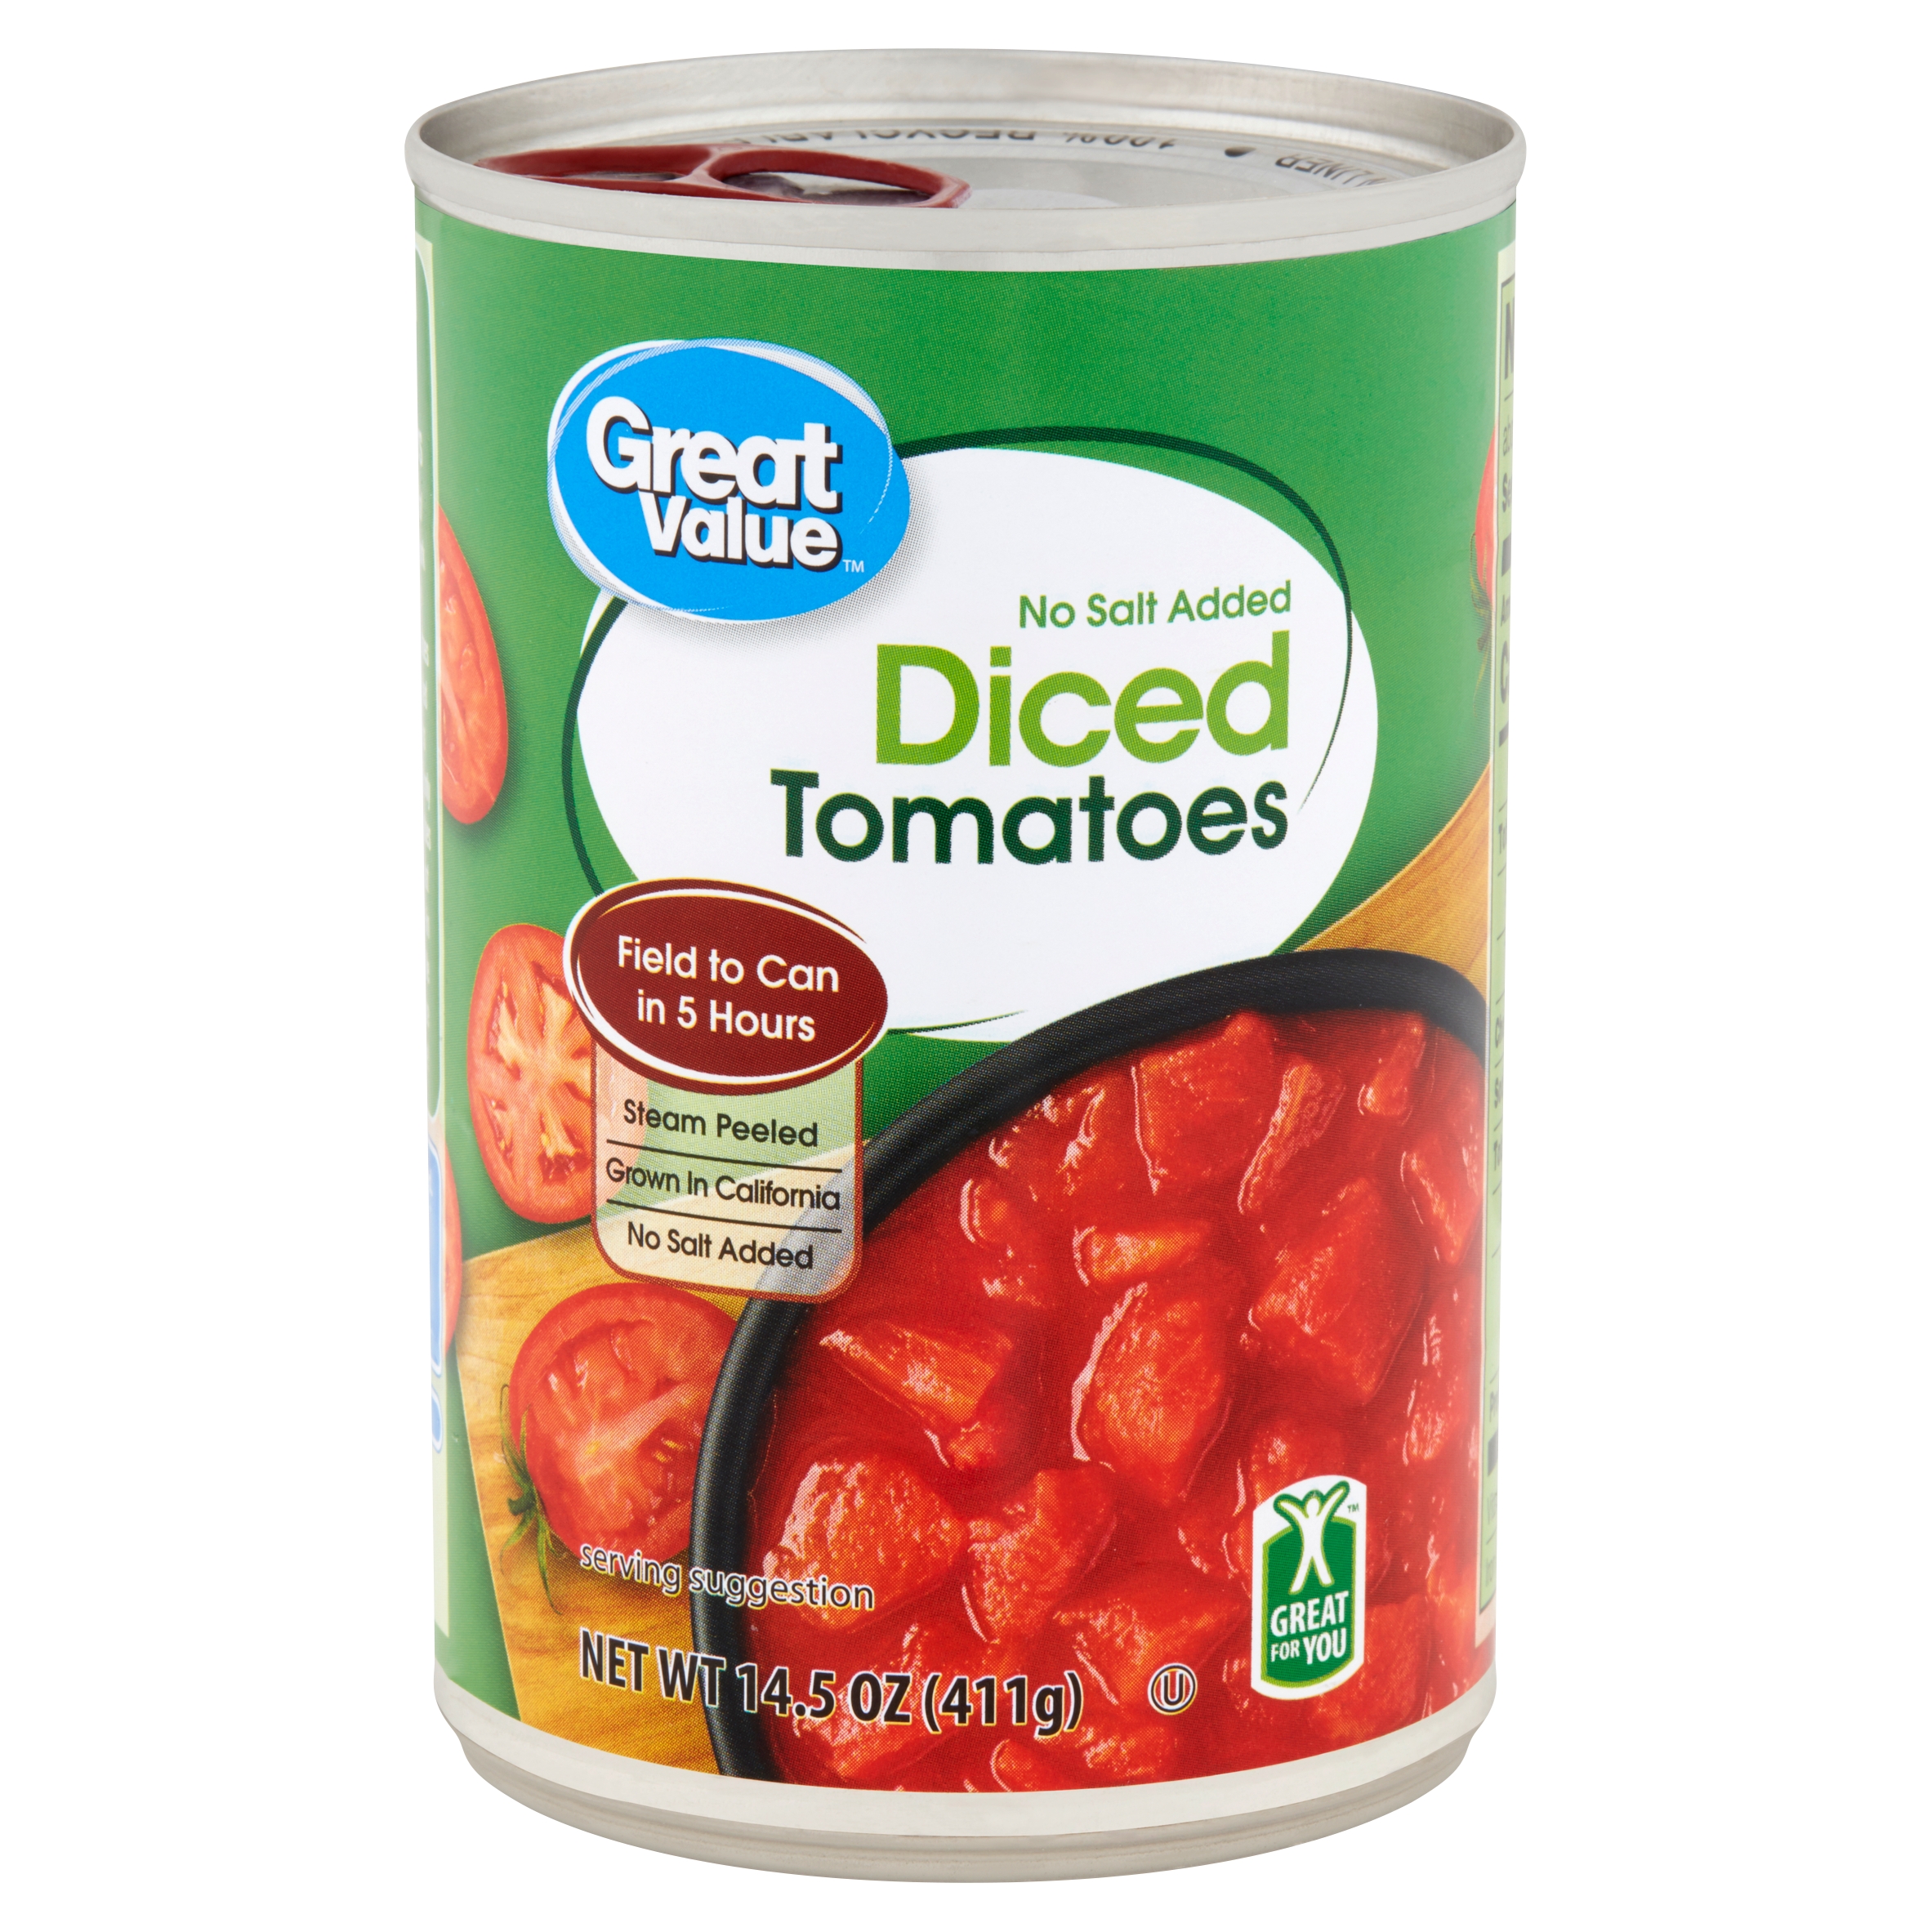 (6 Pack) Great Value No Salt Added Diced Tomatoes, 14.5 Oz Image